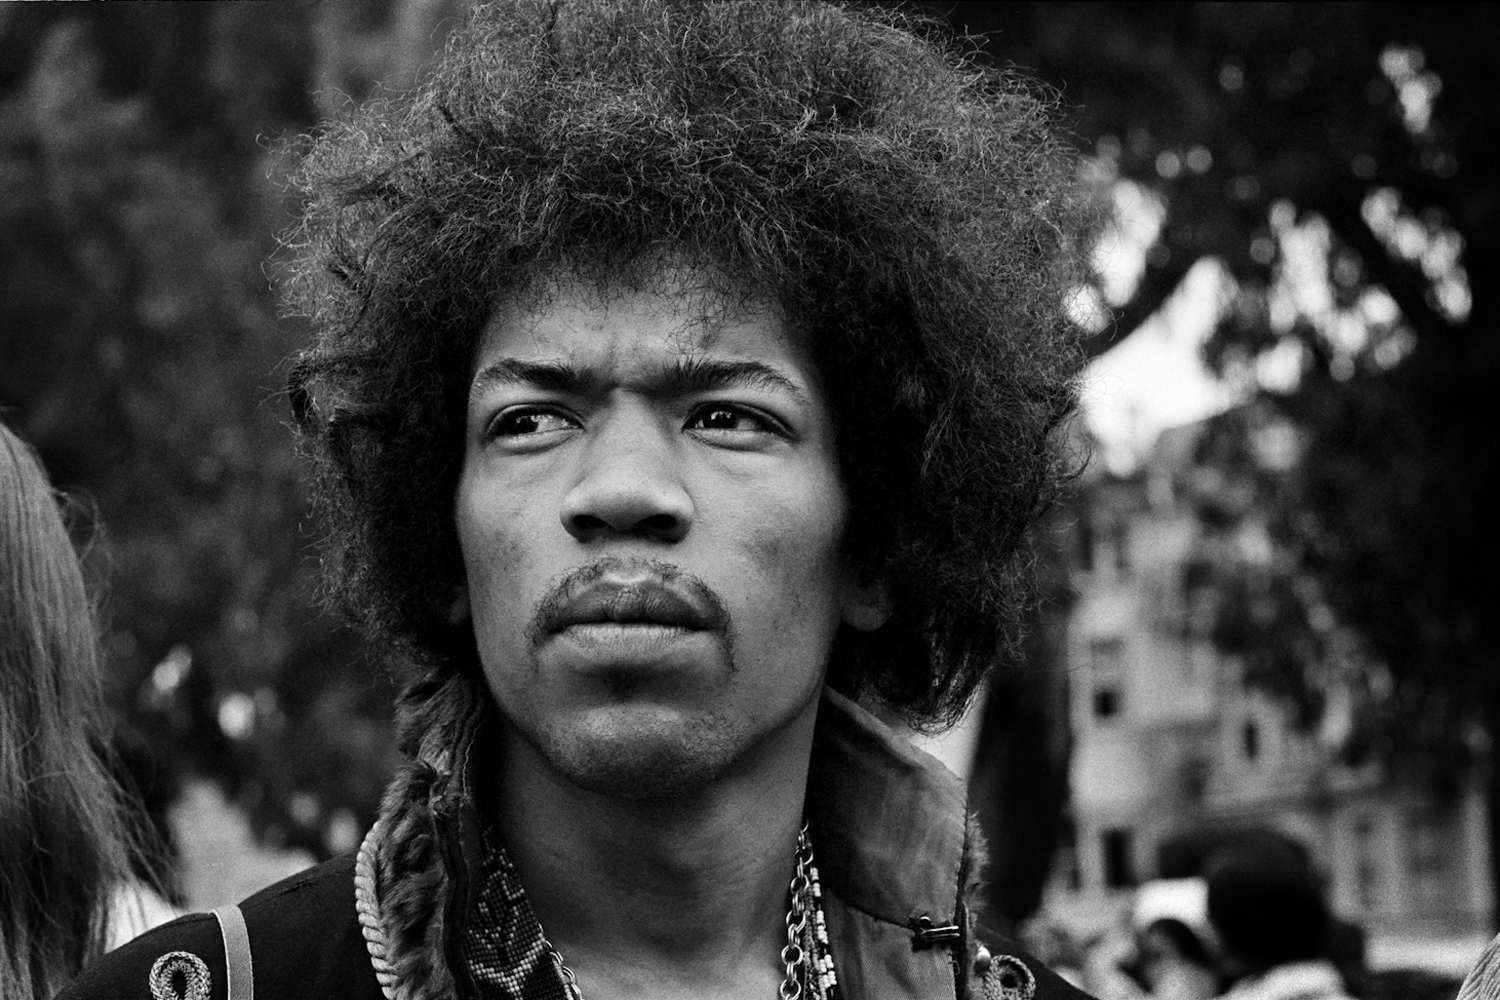 Jimi Hendrix at the Panhandle Free Concert in San Francisco, 1967.